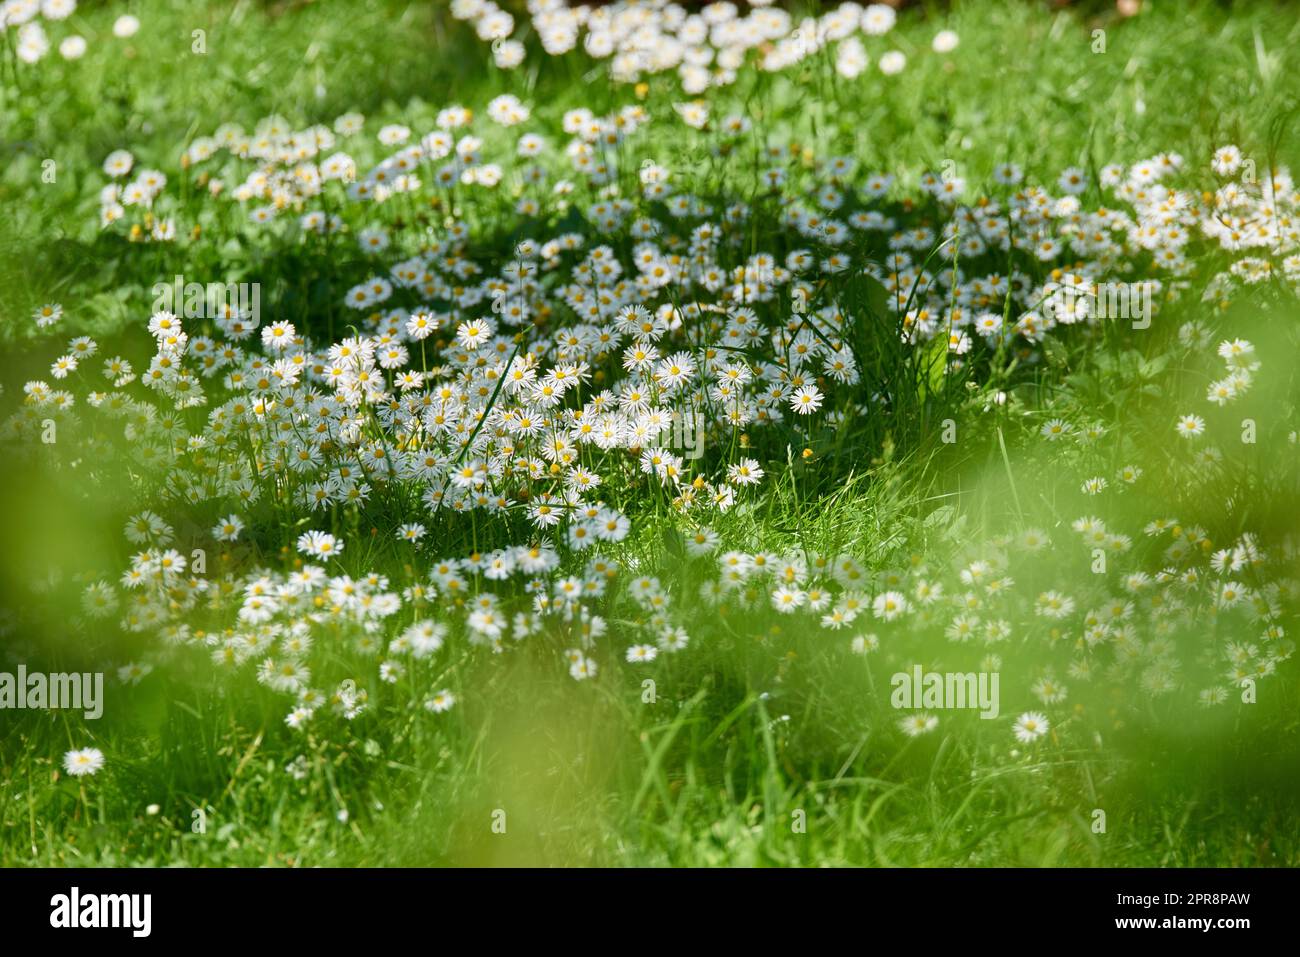 A beautiful meadow in springtime full of flowering daisies with white yellow blossom and green grass. A meadow full of blooming daisies and grass, wild daisy flowers on a field on a sunny day. Stock Photo